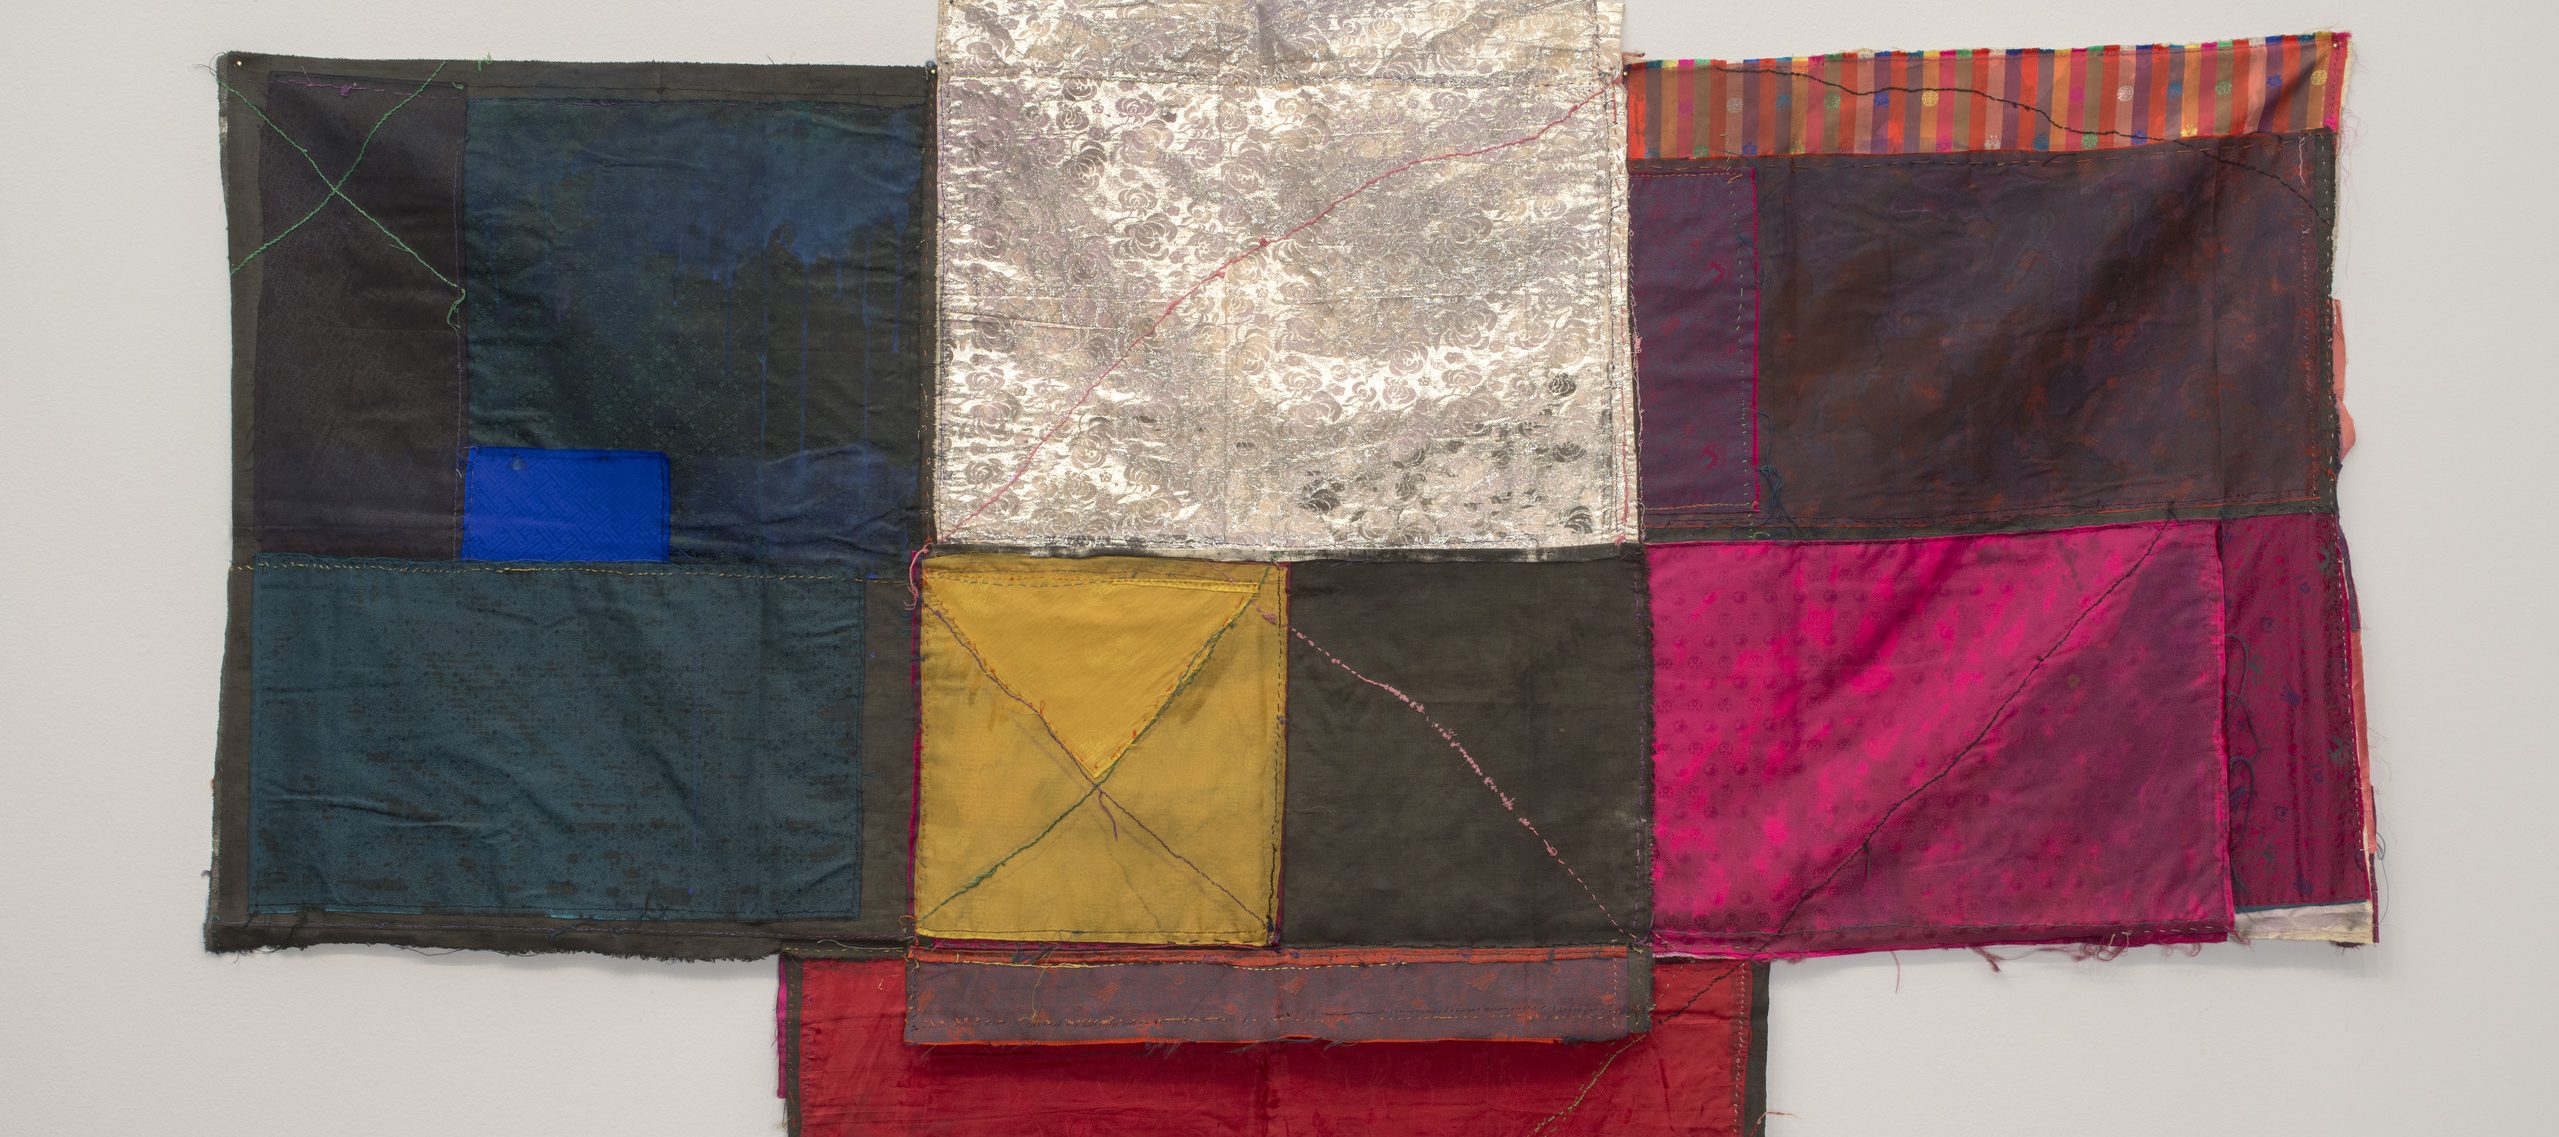 Textile collage of cloth folded and stitched together in loose geometric formations with visible seams making linear patterns. Deep blues on the left and warm colors on the right frame blocks of silver, yellow and grey in the center, which extends into a slightly longer base.